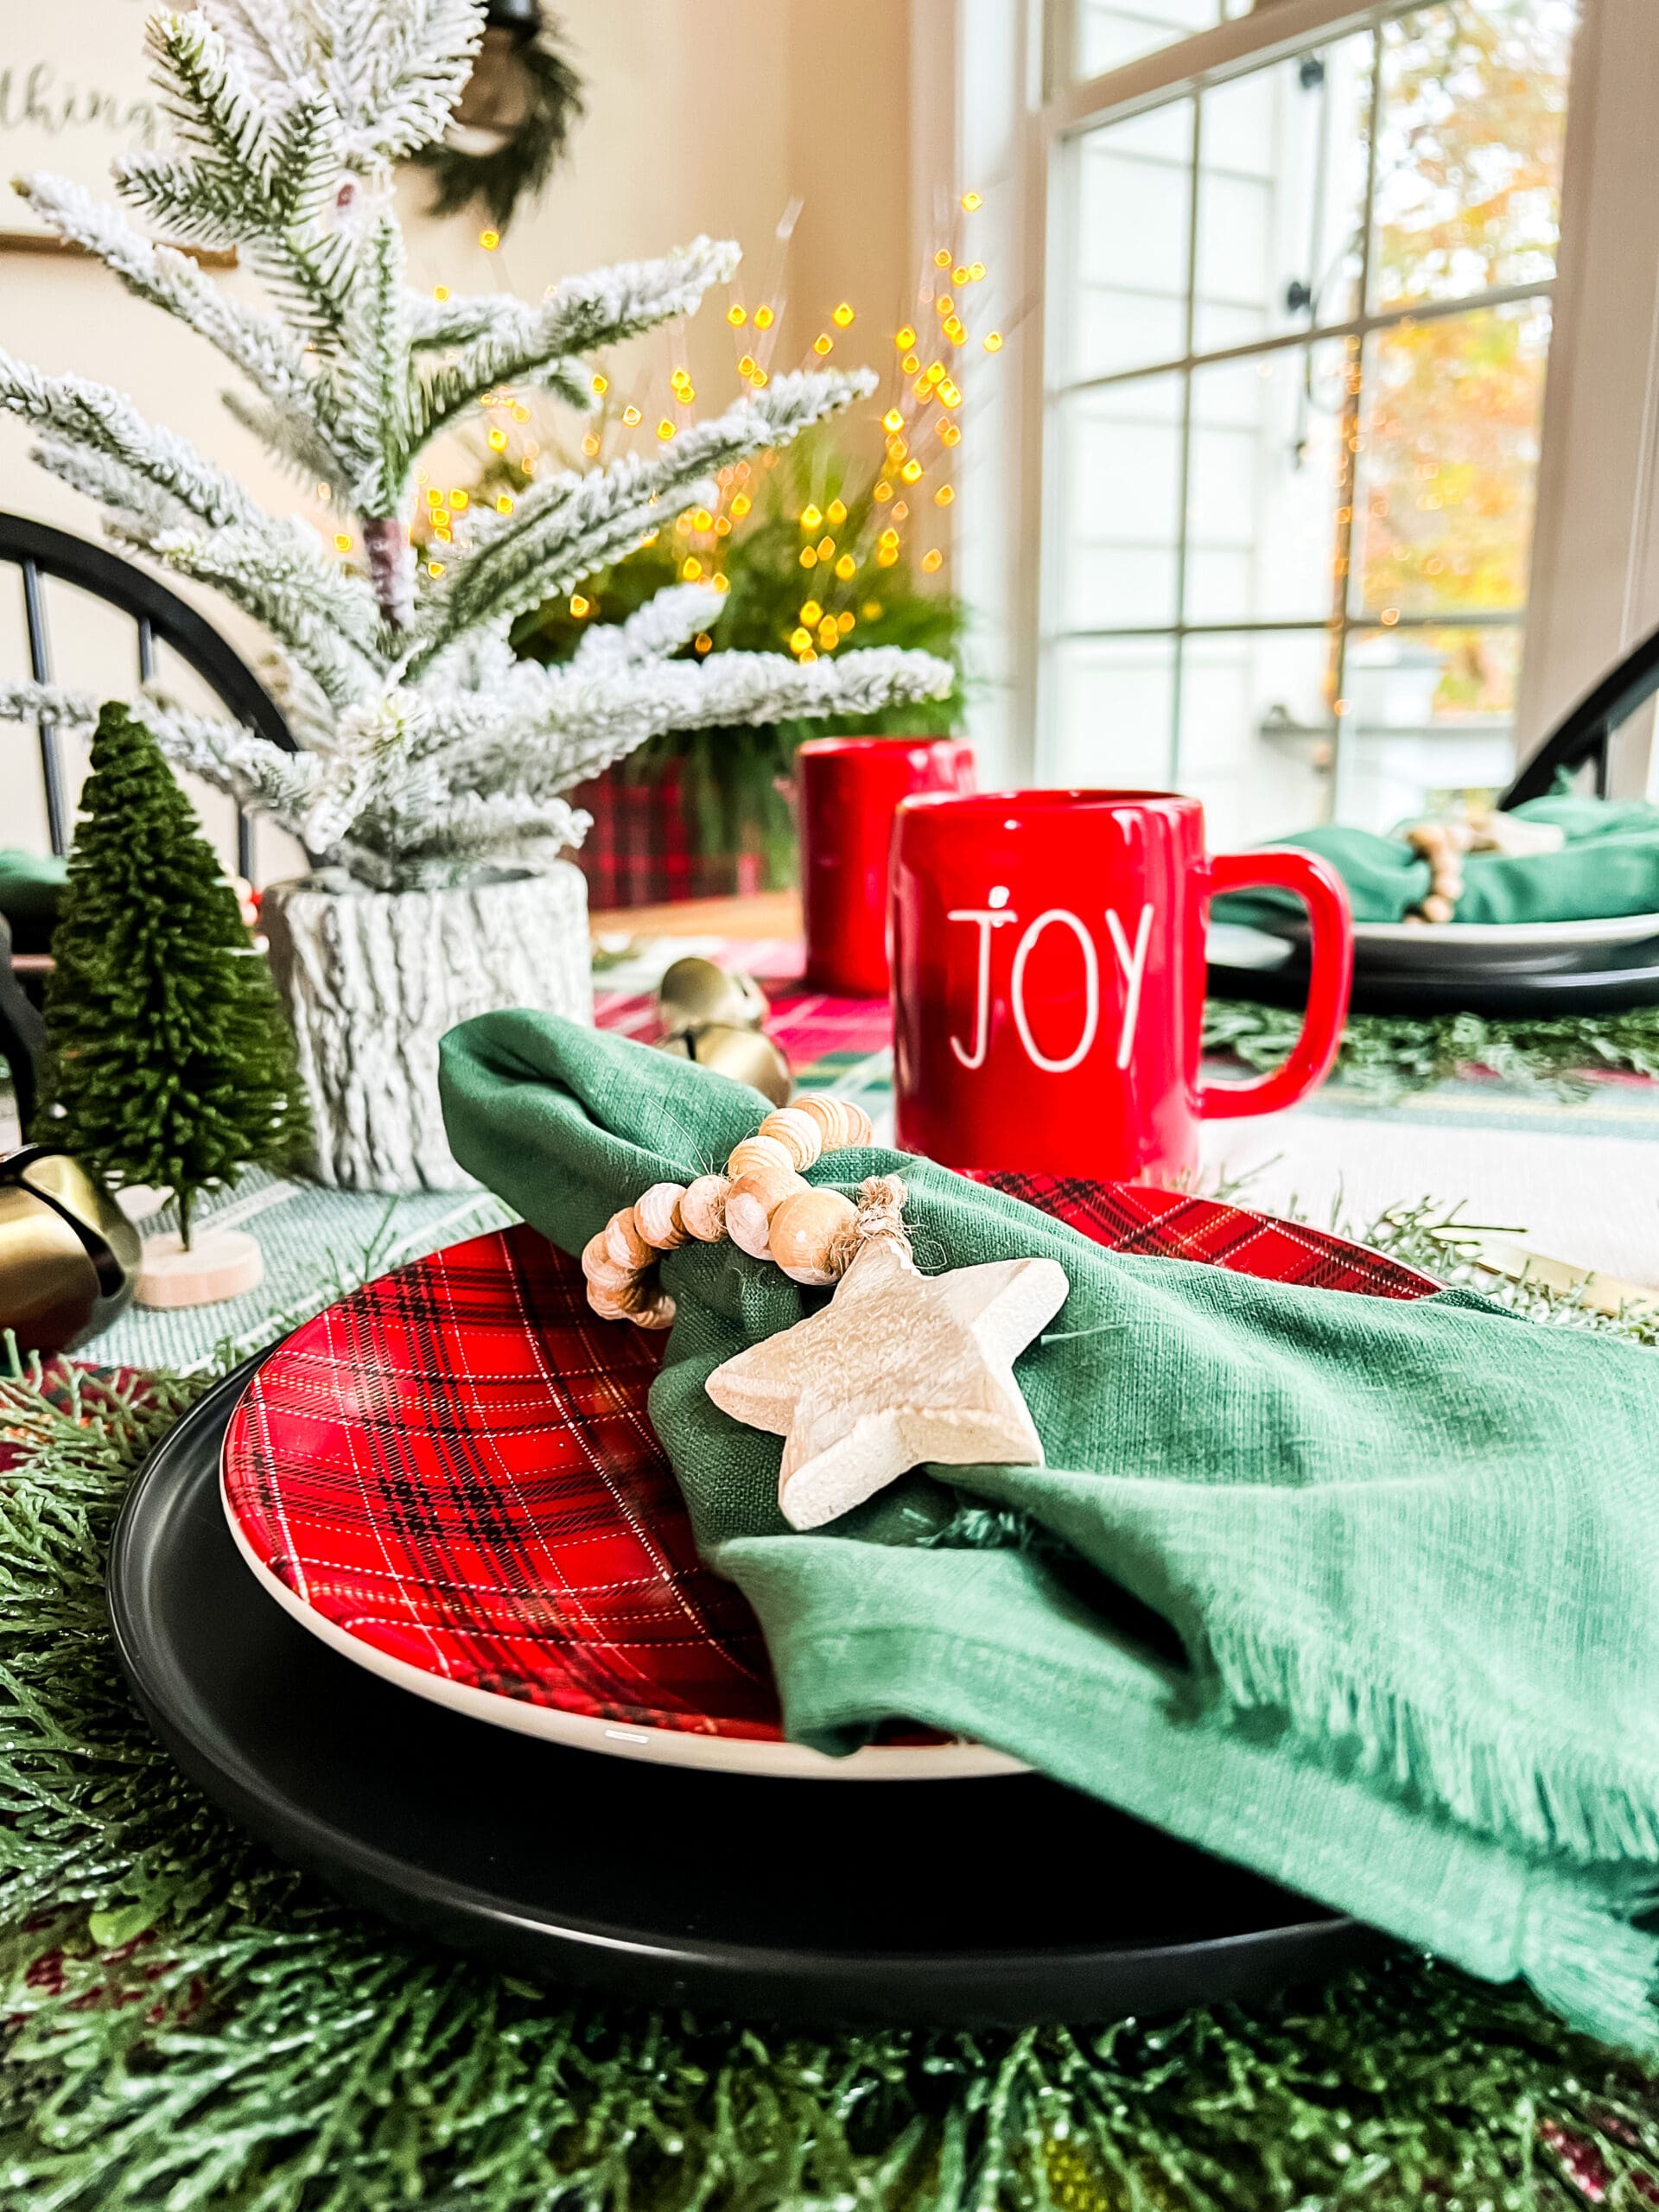 table setting with plaid plates and green napkins as well as Christmas cups